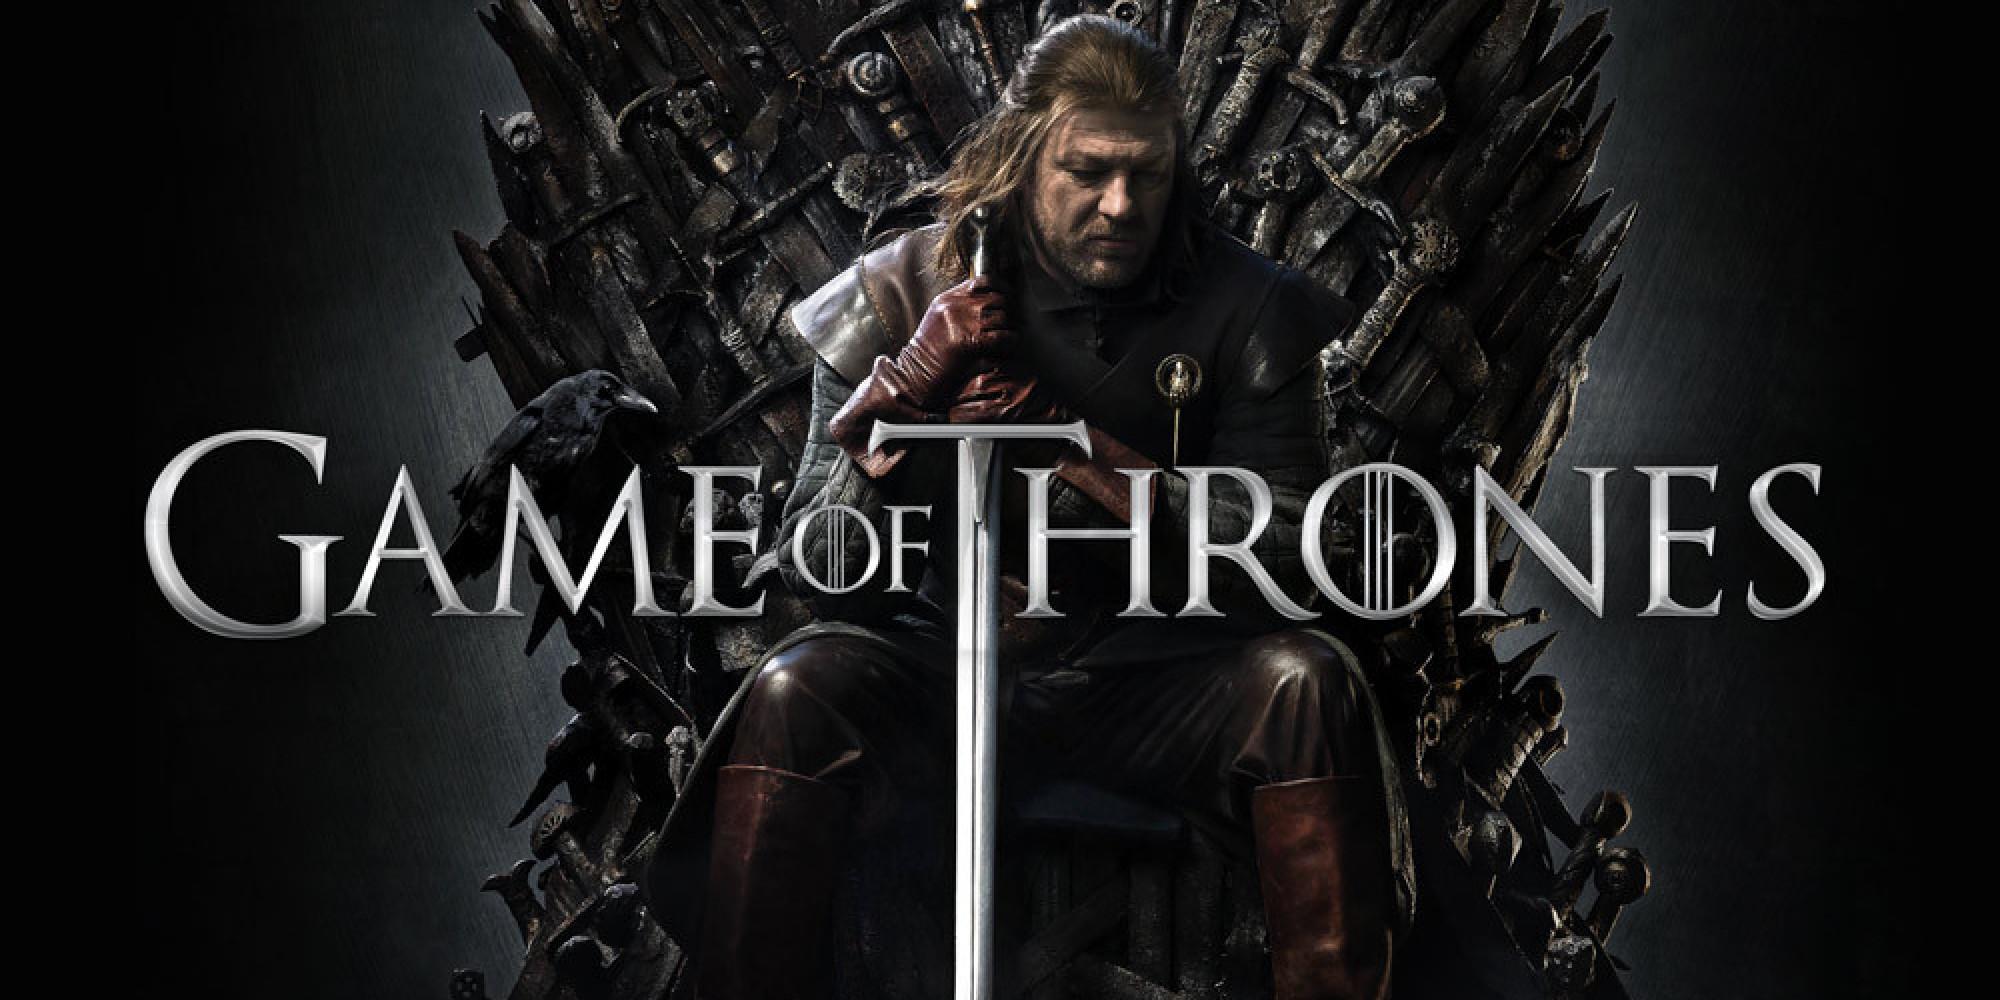 Chinese censors turn ‘game of thrones’ into a “medieval 